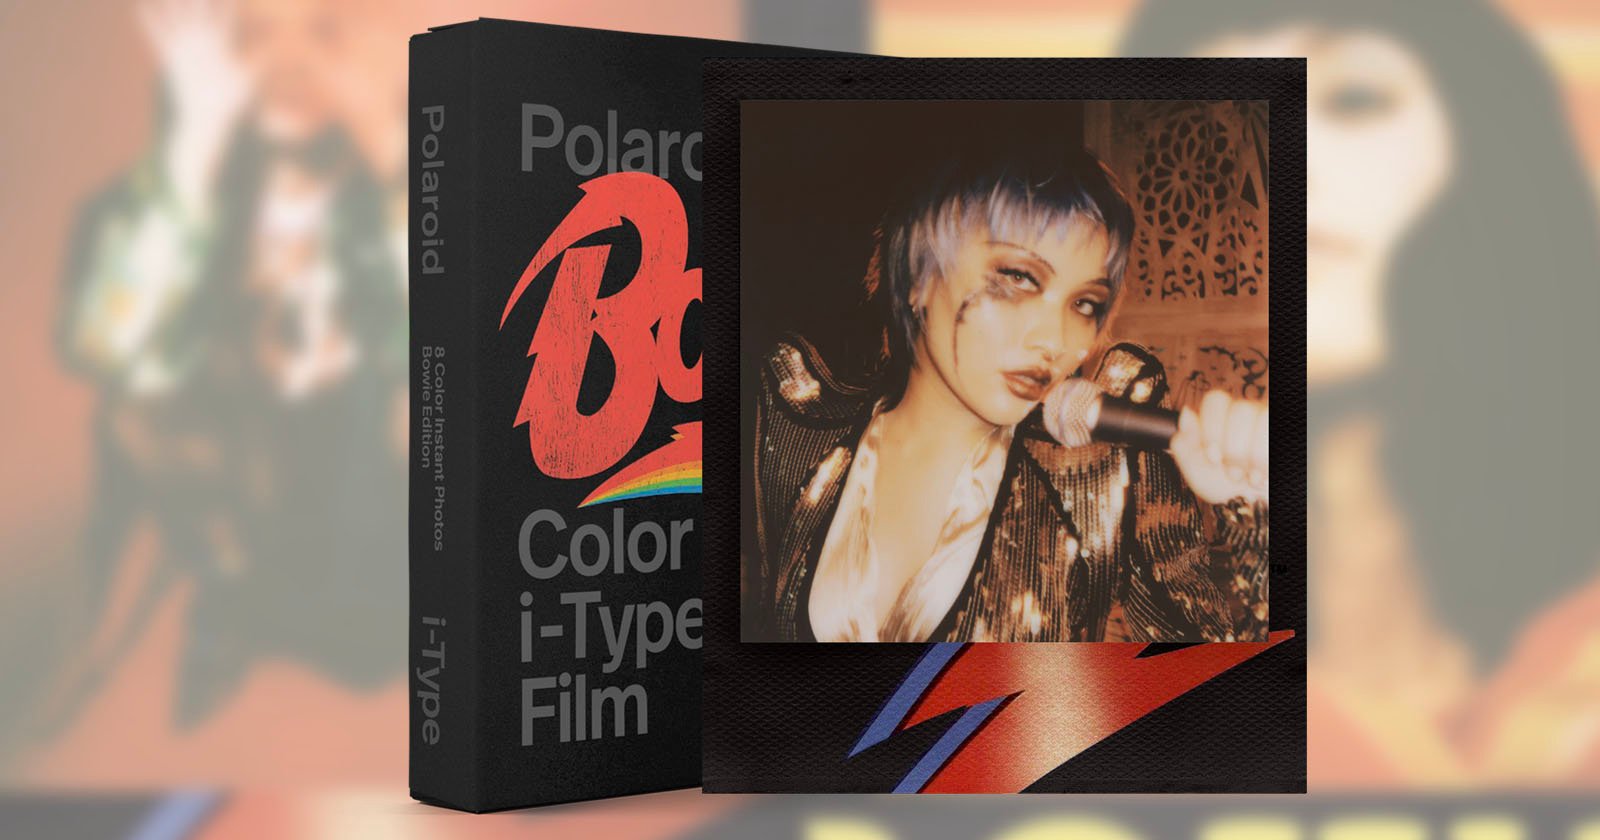 Polaroid has released a David Bowie edition film